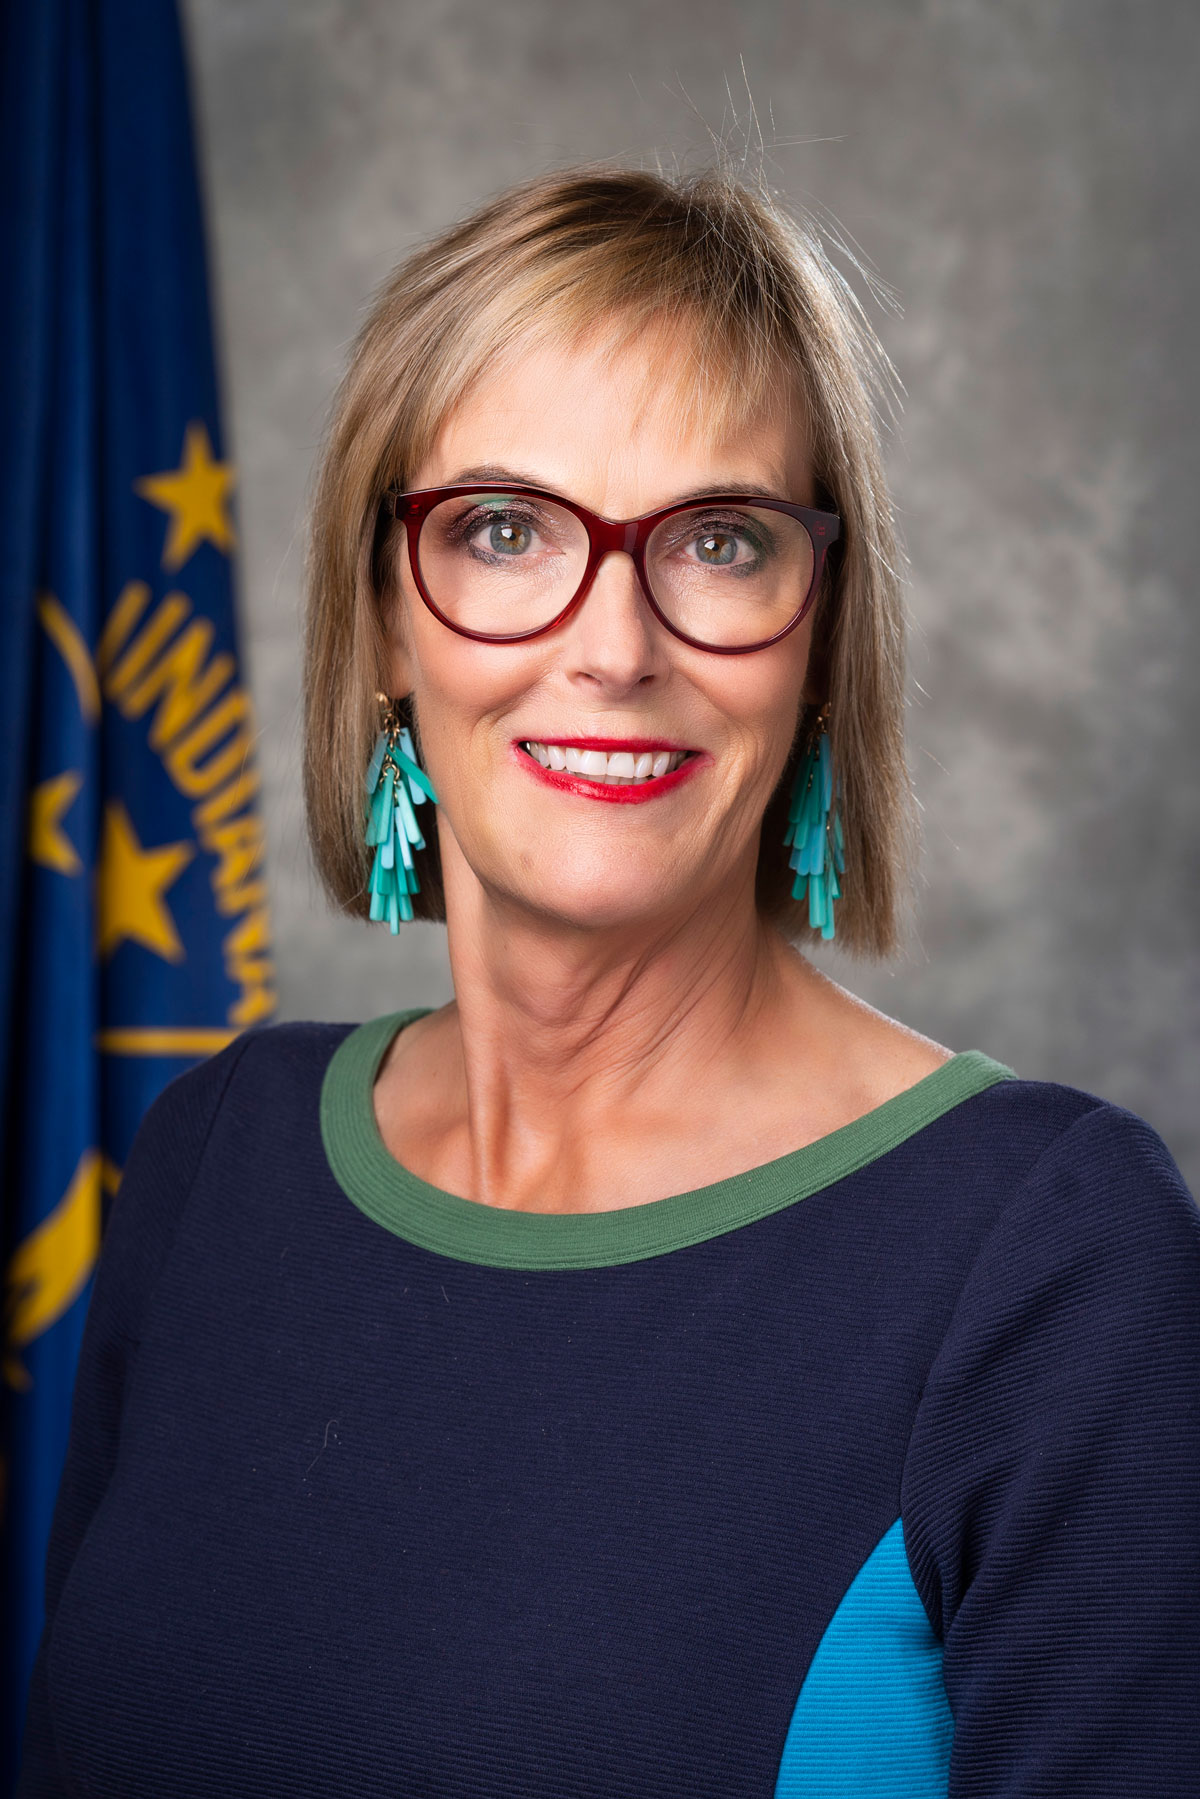 Lieutenant Governor Suzanne Crouch Biography